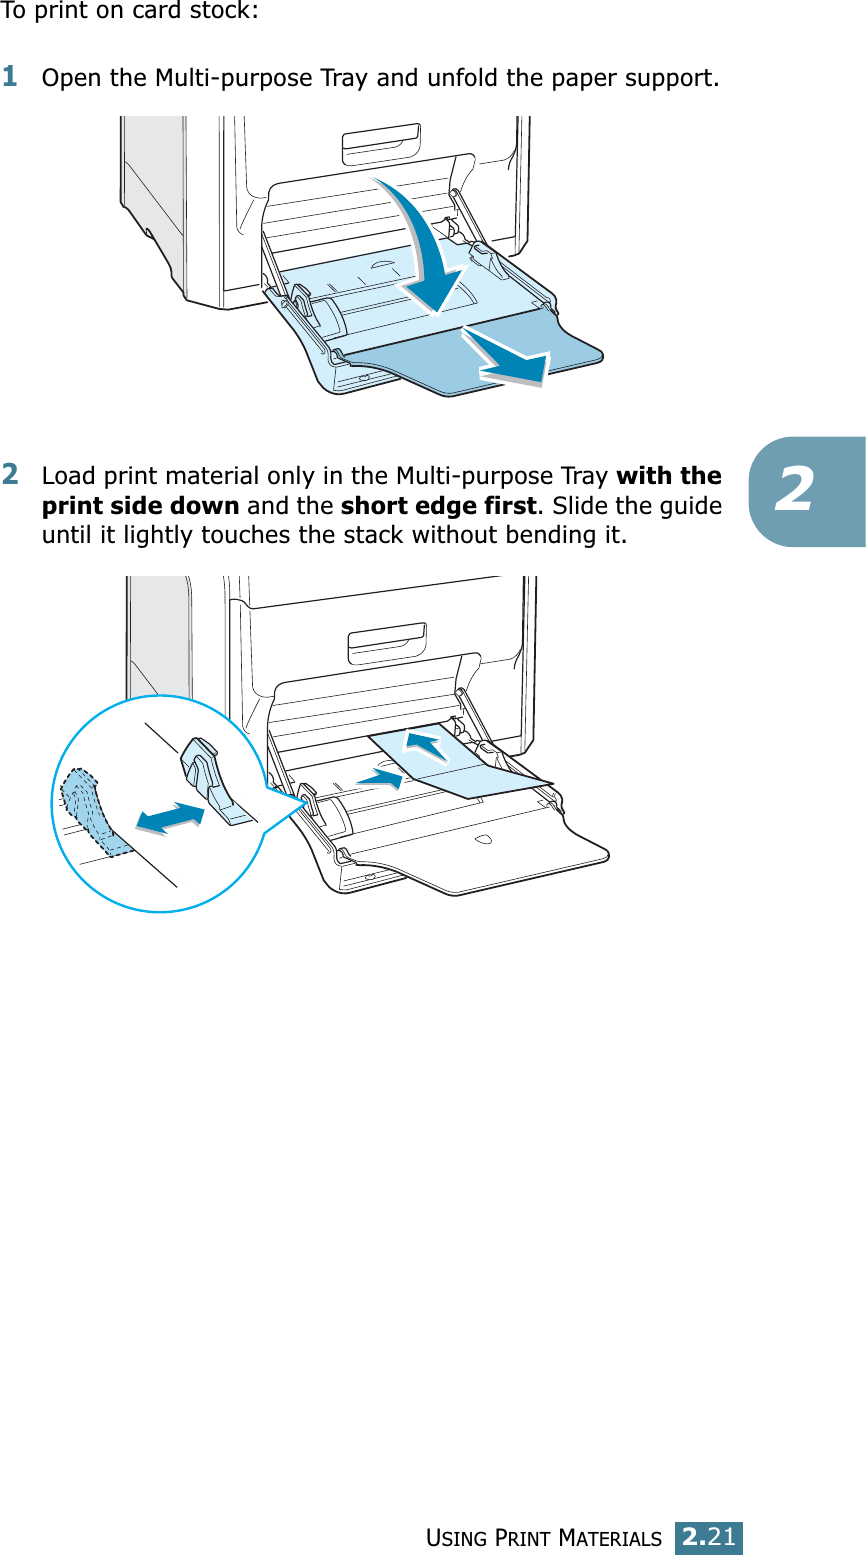 USING PRINT MATERIALS2.212To print on card stock:1Open the Multi-purpose Tray and unfold the paper support.2Load print material only in the Multi-purpose Tray with the print side down and the short edge first. Slide the guide until it lightly touches the stack without bending it.